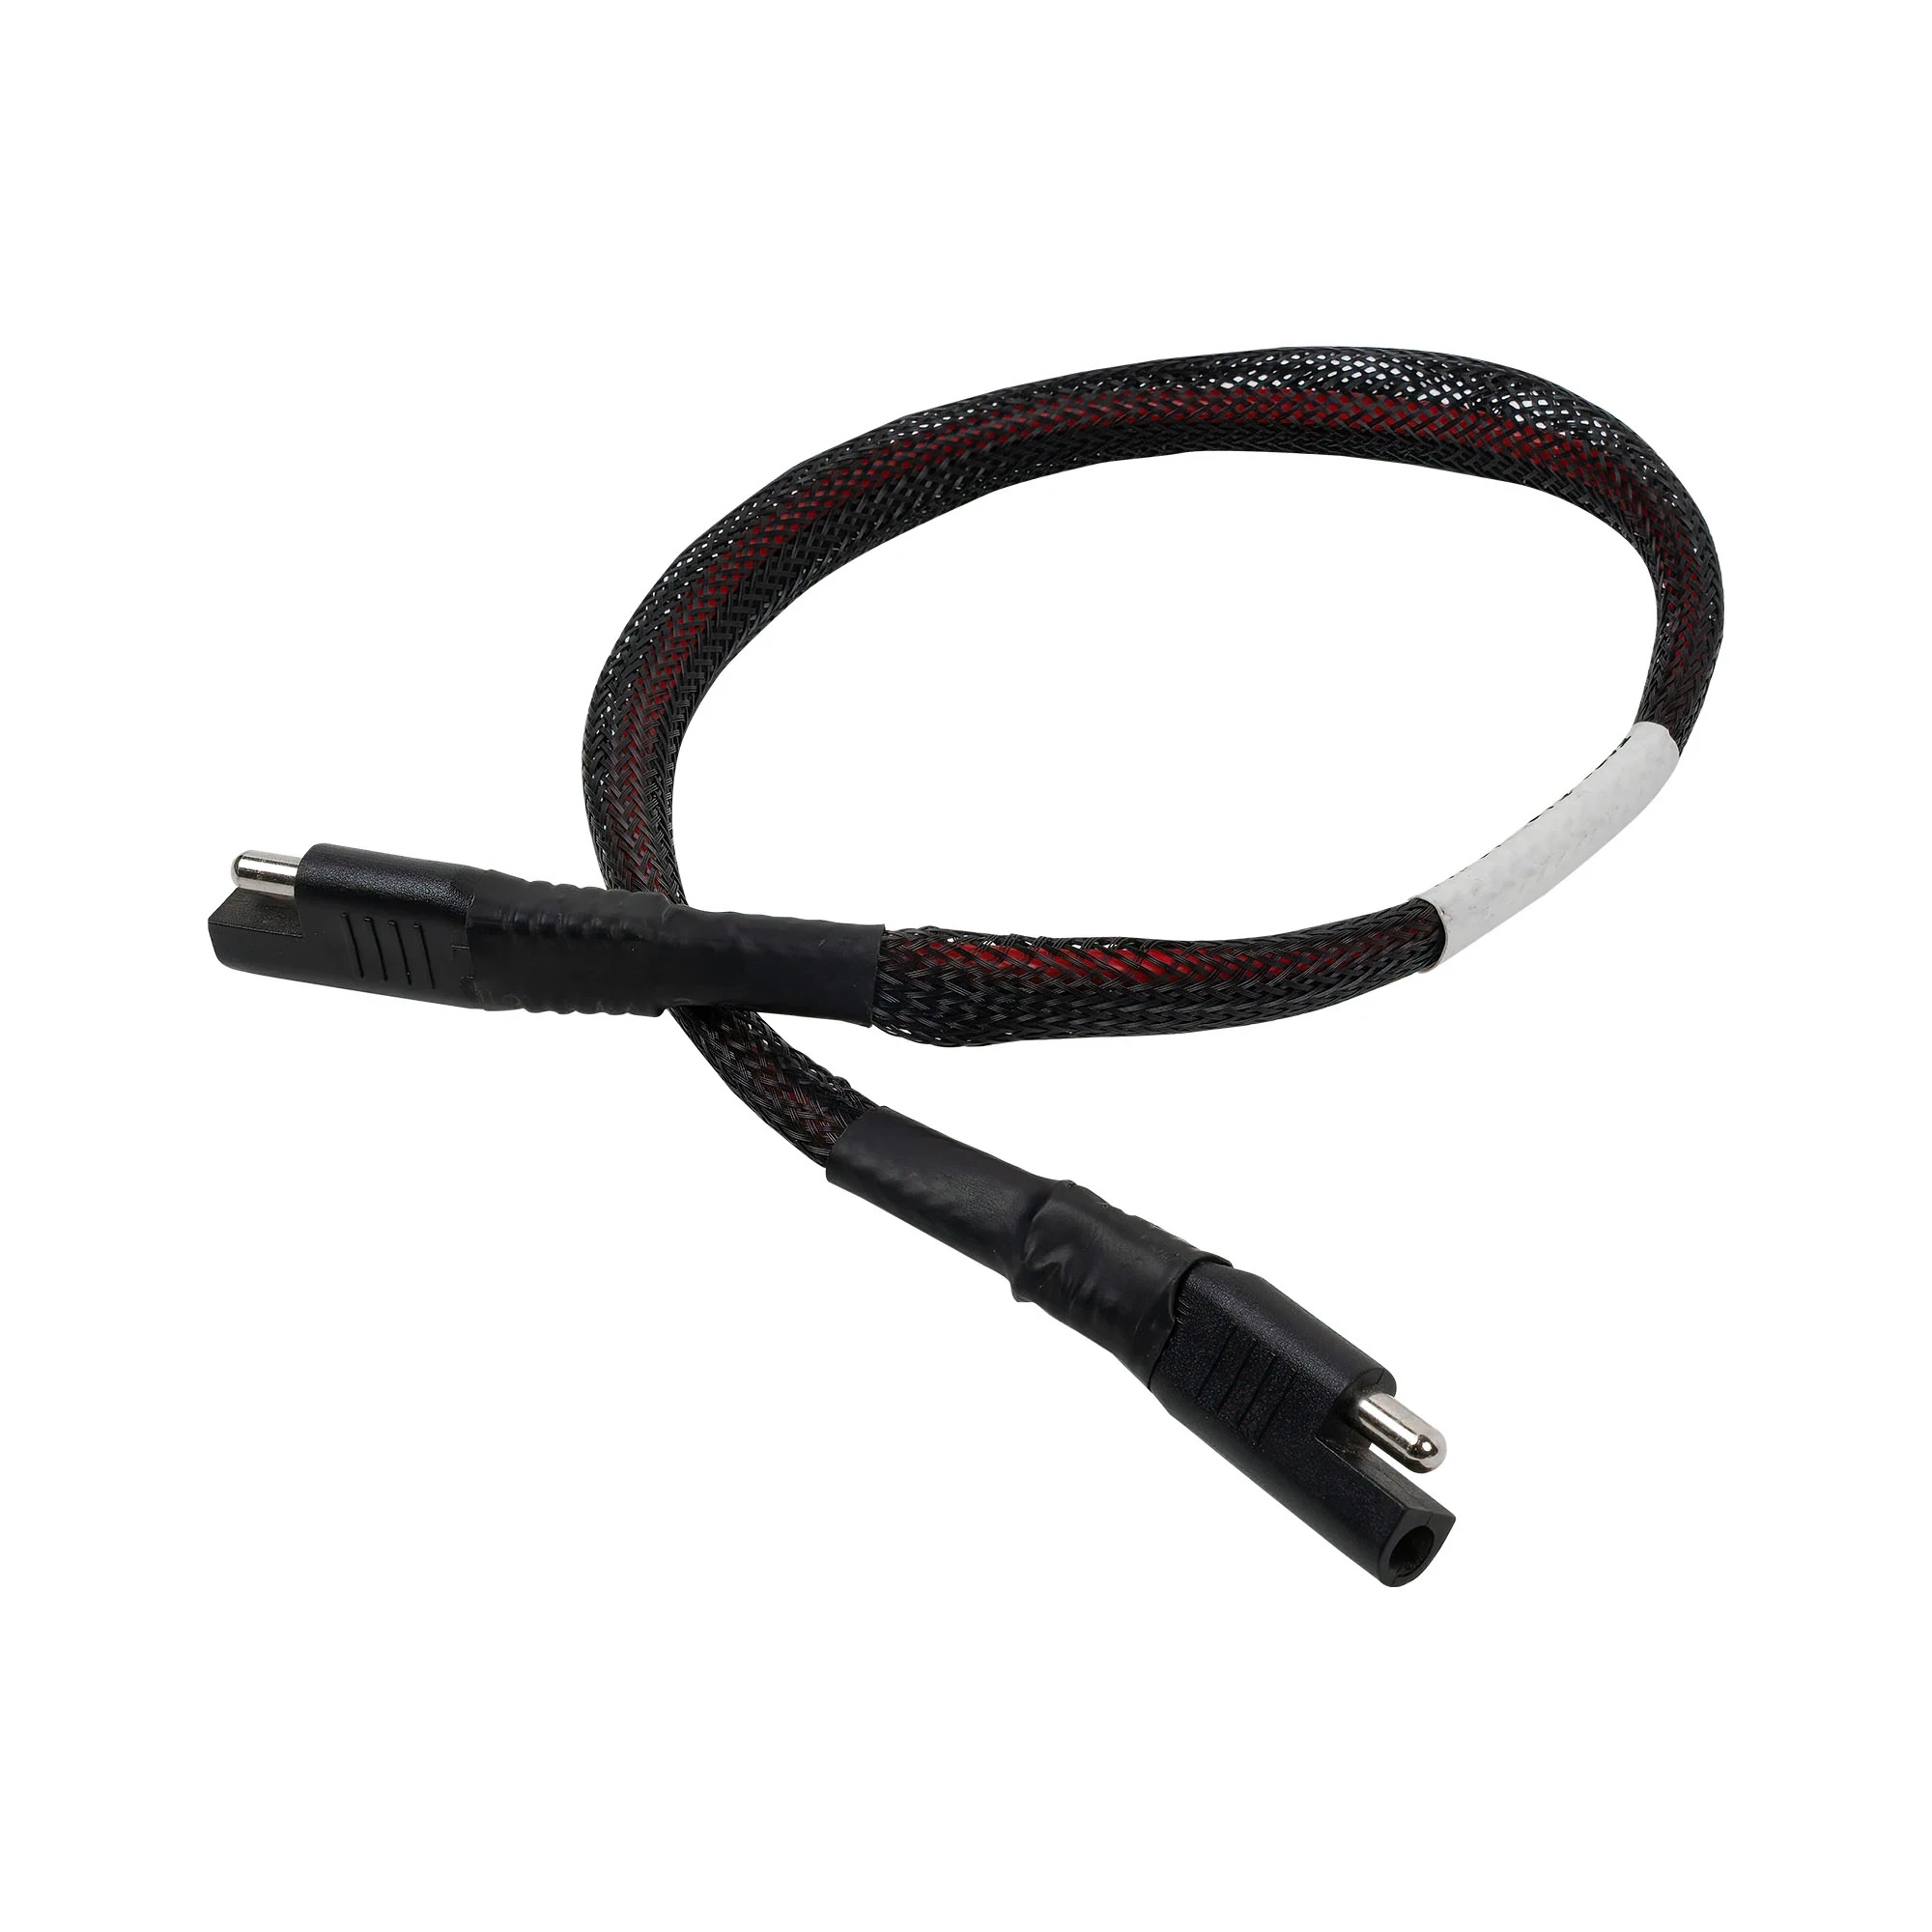 ePDL+ Drive Extension Cord - Primary